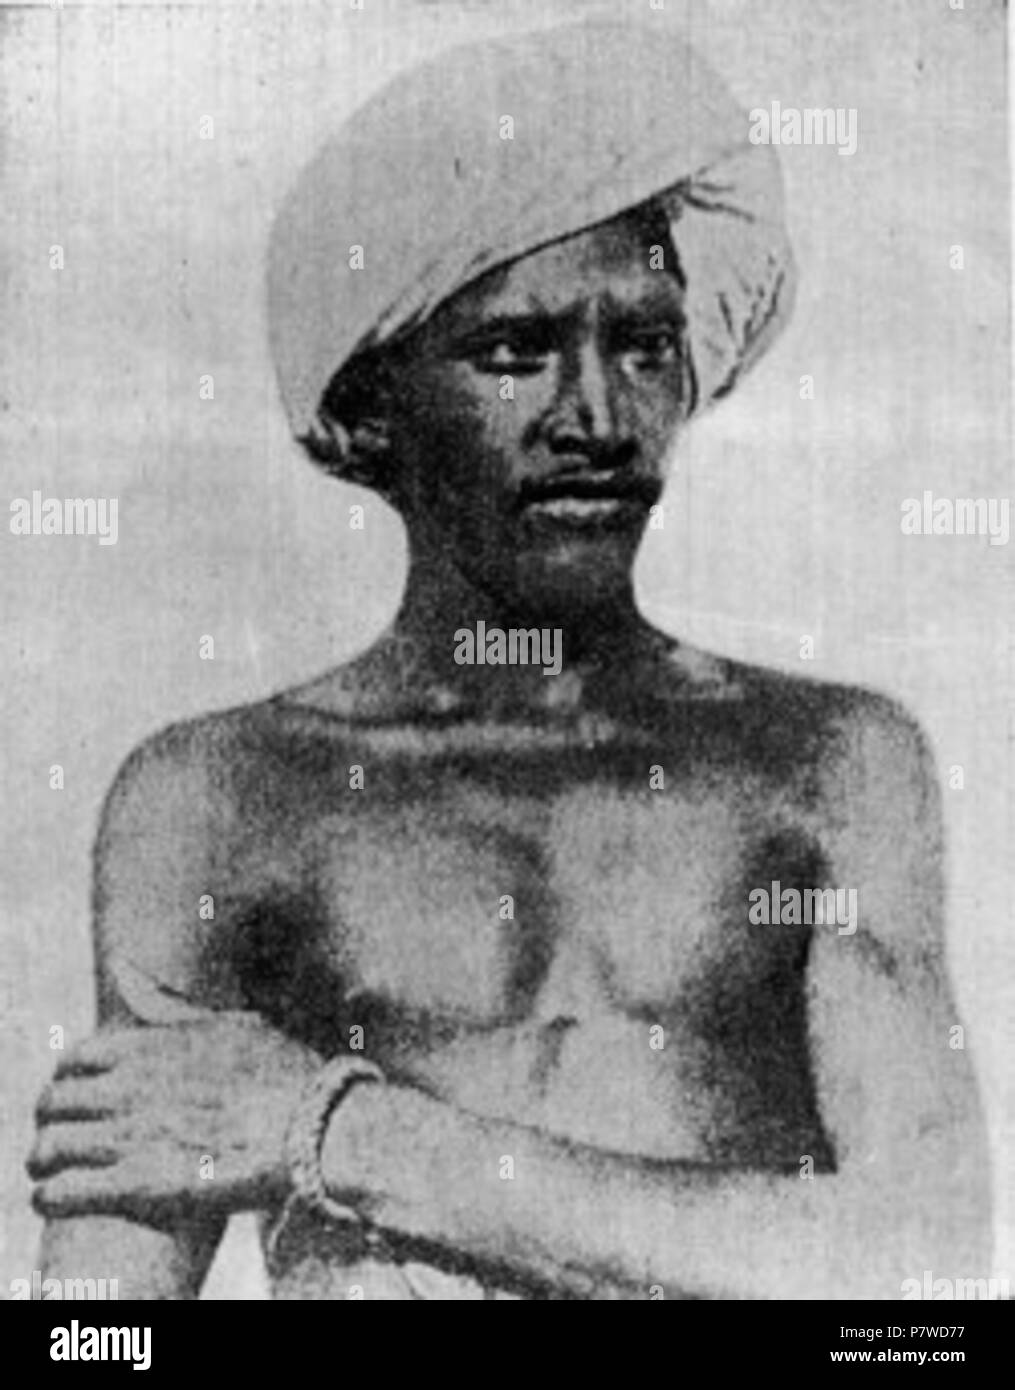 Image Of Birsa Munda, A Popular Tribal Freedom Fighter In Surajkund Public  Craft Fair. Stock Photo, Picture and Royalty Free Image. Image 72619616.